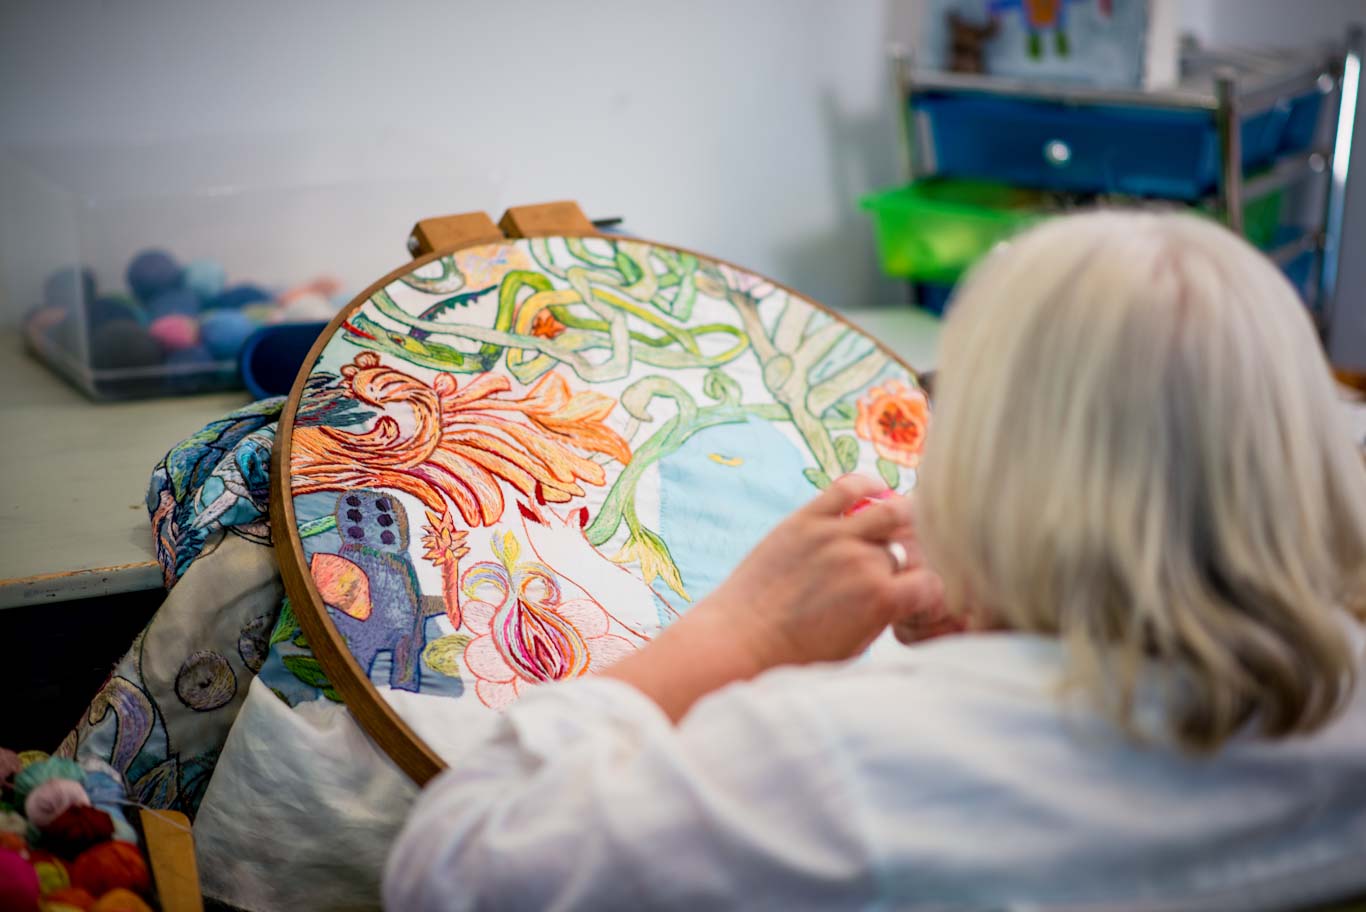 Anna Torma, facing away from the camera is seated at her worktable, a large embroidery hoop is sitting on the table in front of her. In the embroidery hoop is a work in progress full of multiple different colors of embroidery thread.